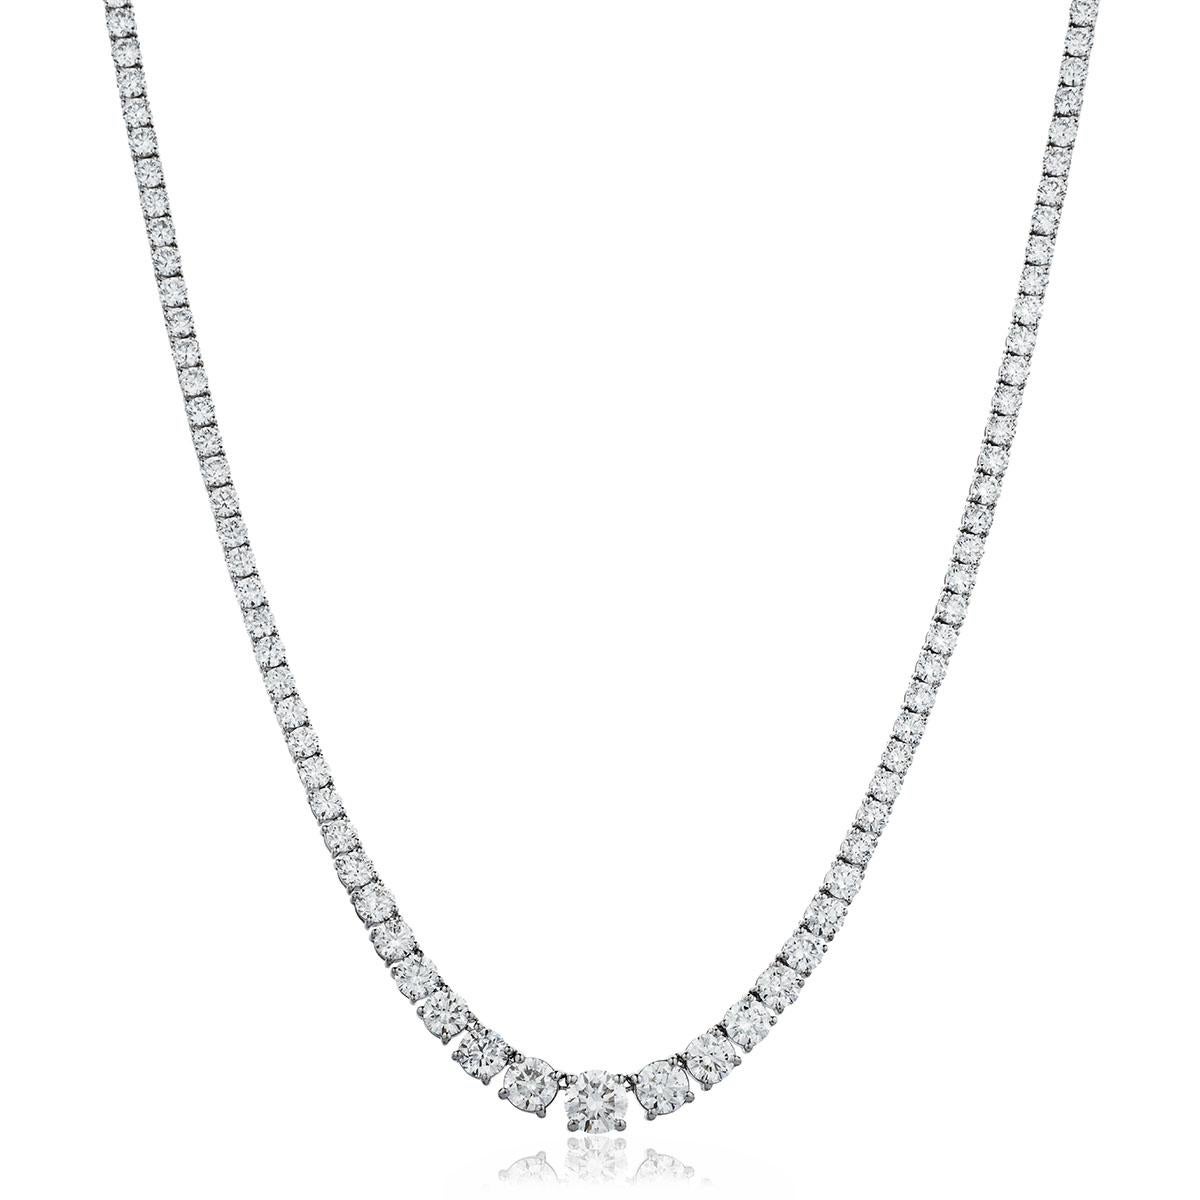 An impressive classic Riviera Tennis Necklace a line that features a substantial total Diamond weight of 13.72 Carats in beautifully graduated Round Brilliant Cut gems with a sparkly white color G / H clarity SI eye clean, each stone has a four-claw